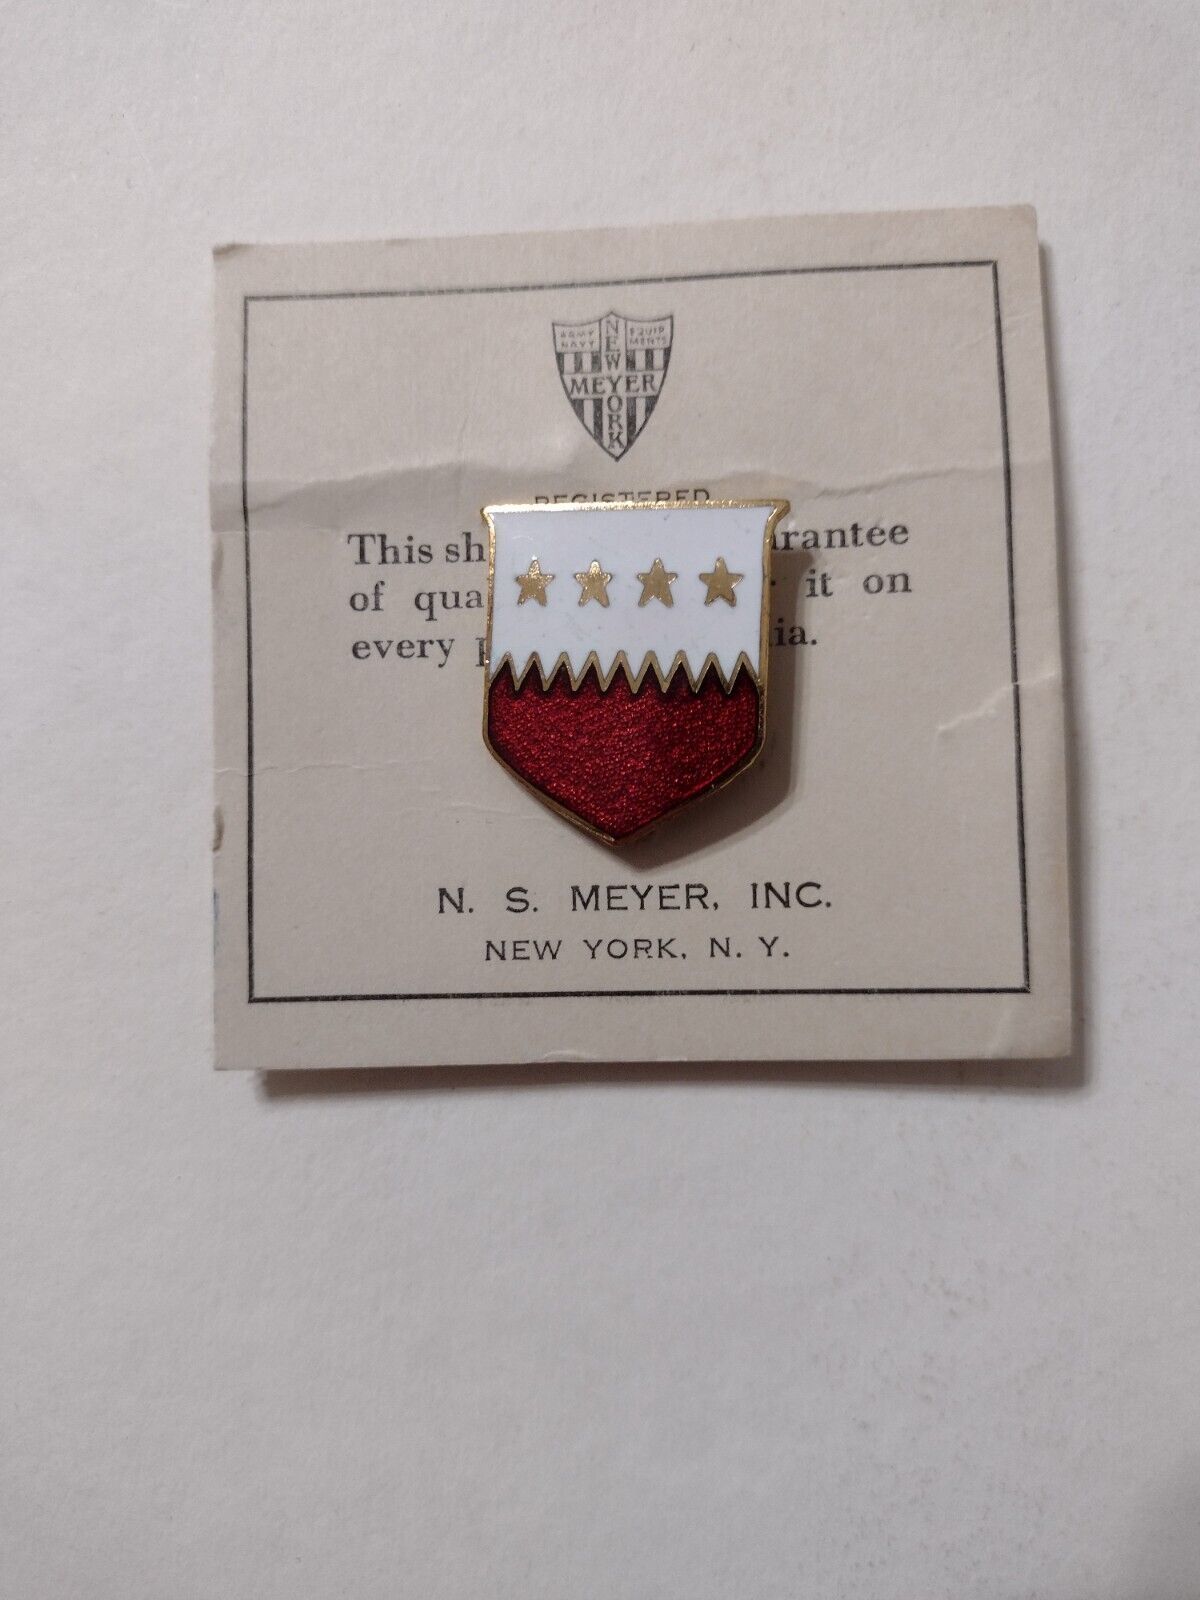 WW2 ARMY DUI DI UNIT CREST - 5th MEDICAL BN. ON N.S. MEYER CARD OF ISSUE:KY23-9 - $16.00